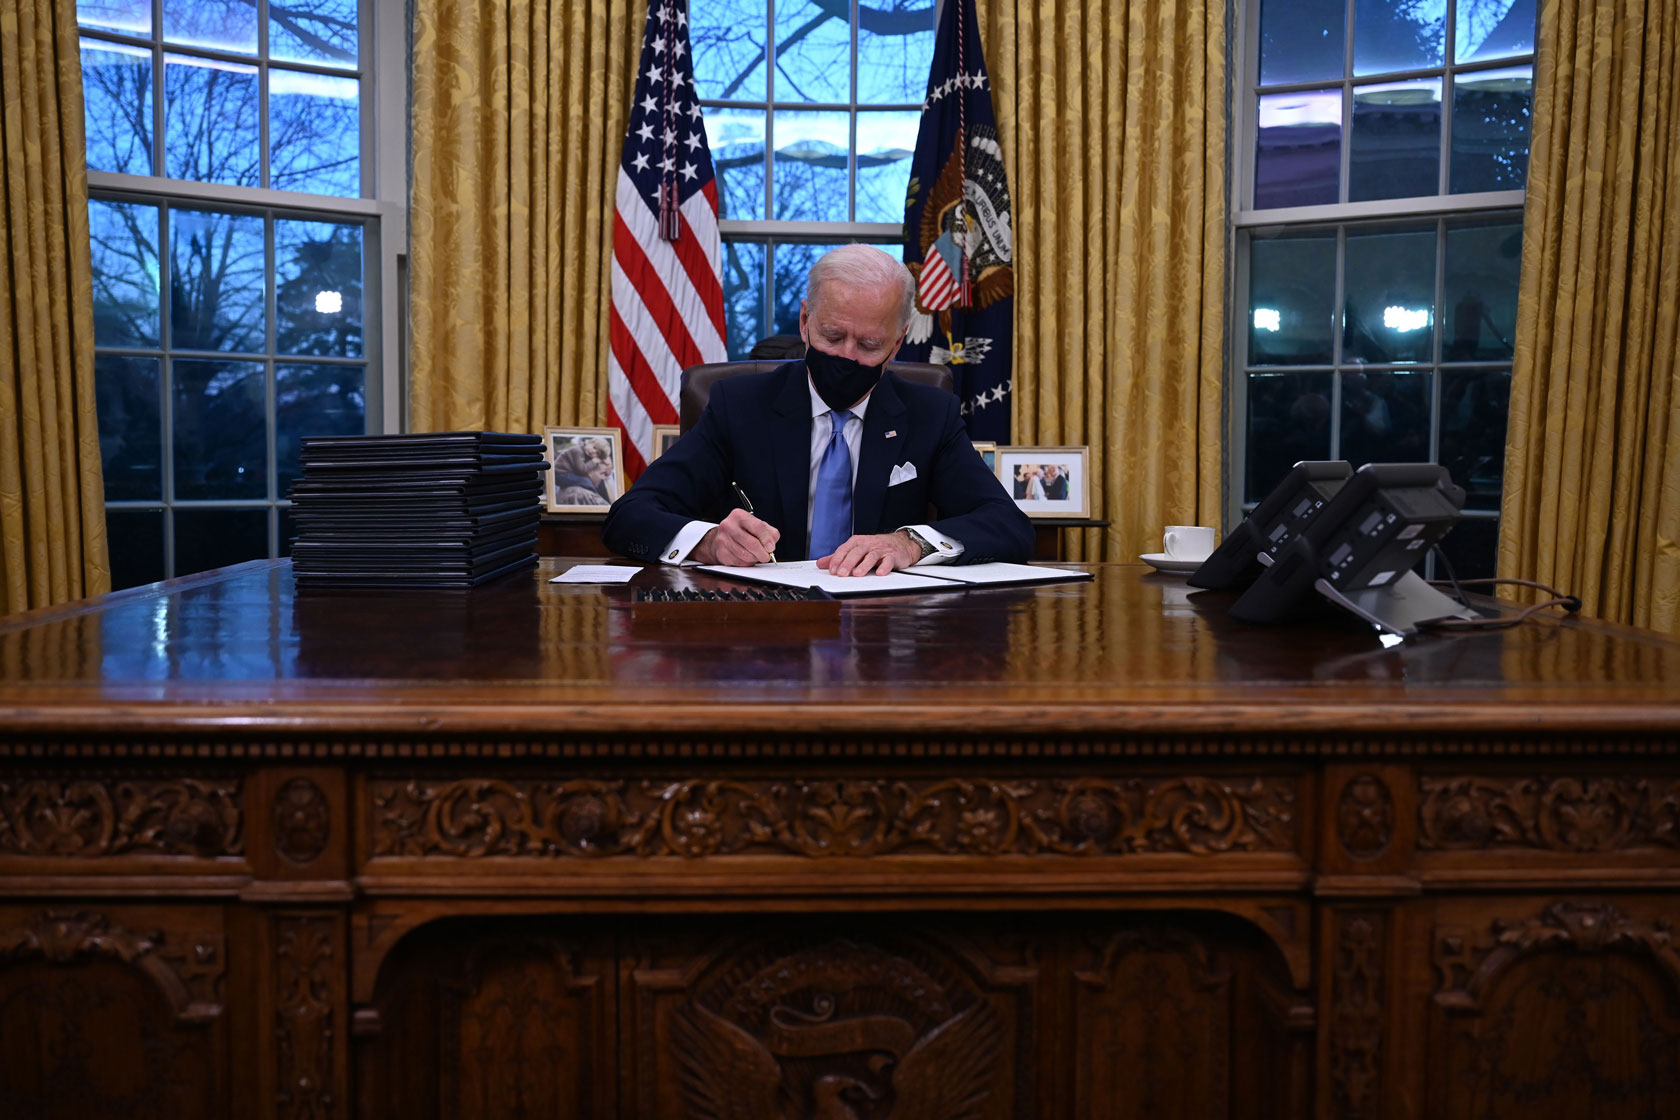 President Joe Biden signs a series of executive orders in the Oval Office of the White House in Washington, D.C.